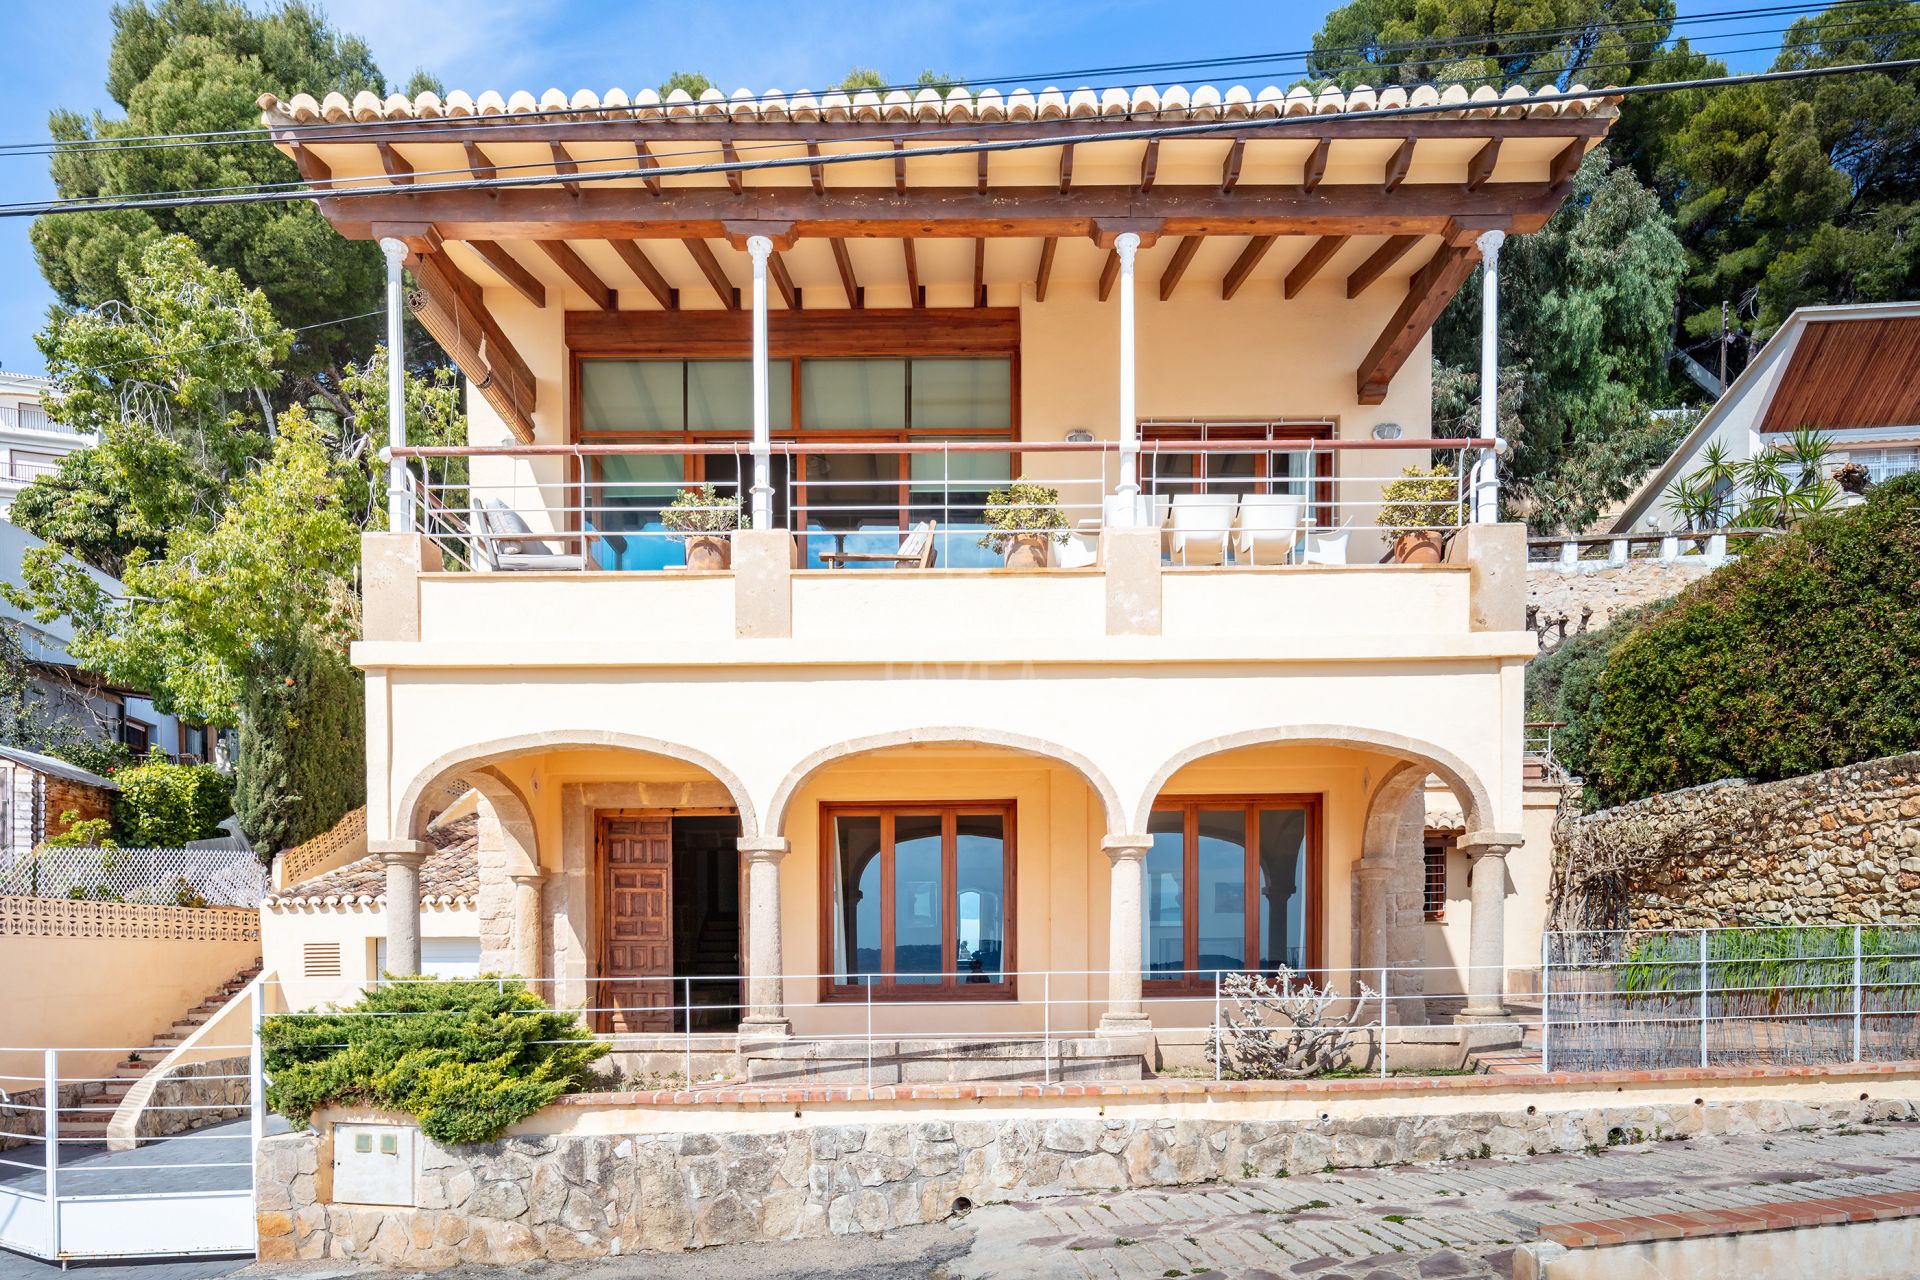 Villa for sale in the area of the Port of Jávea, with spectacular views of the sea and the Yacht Club